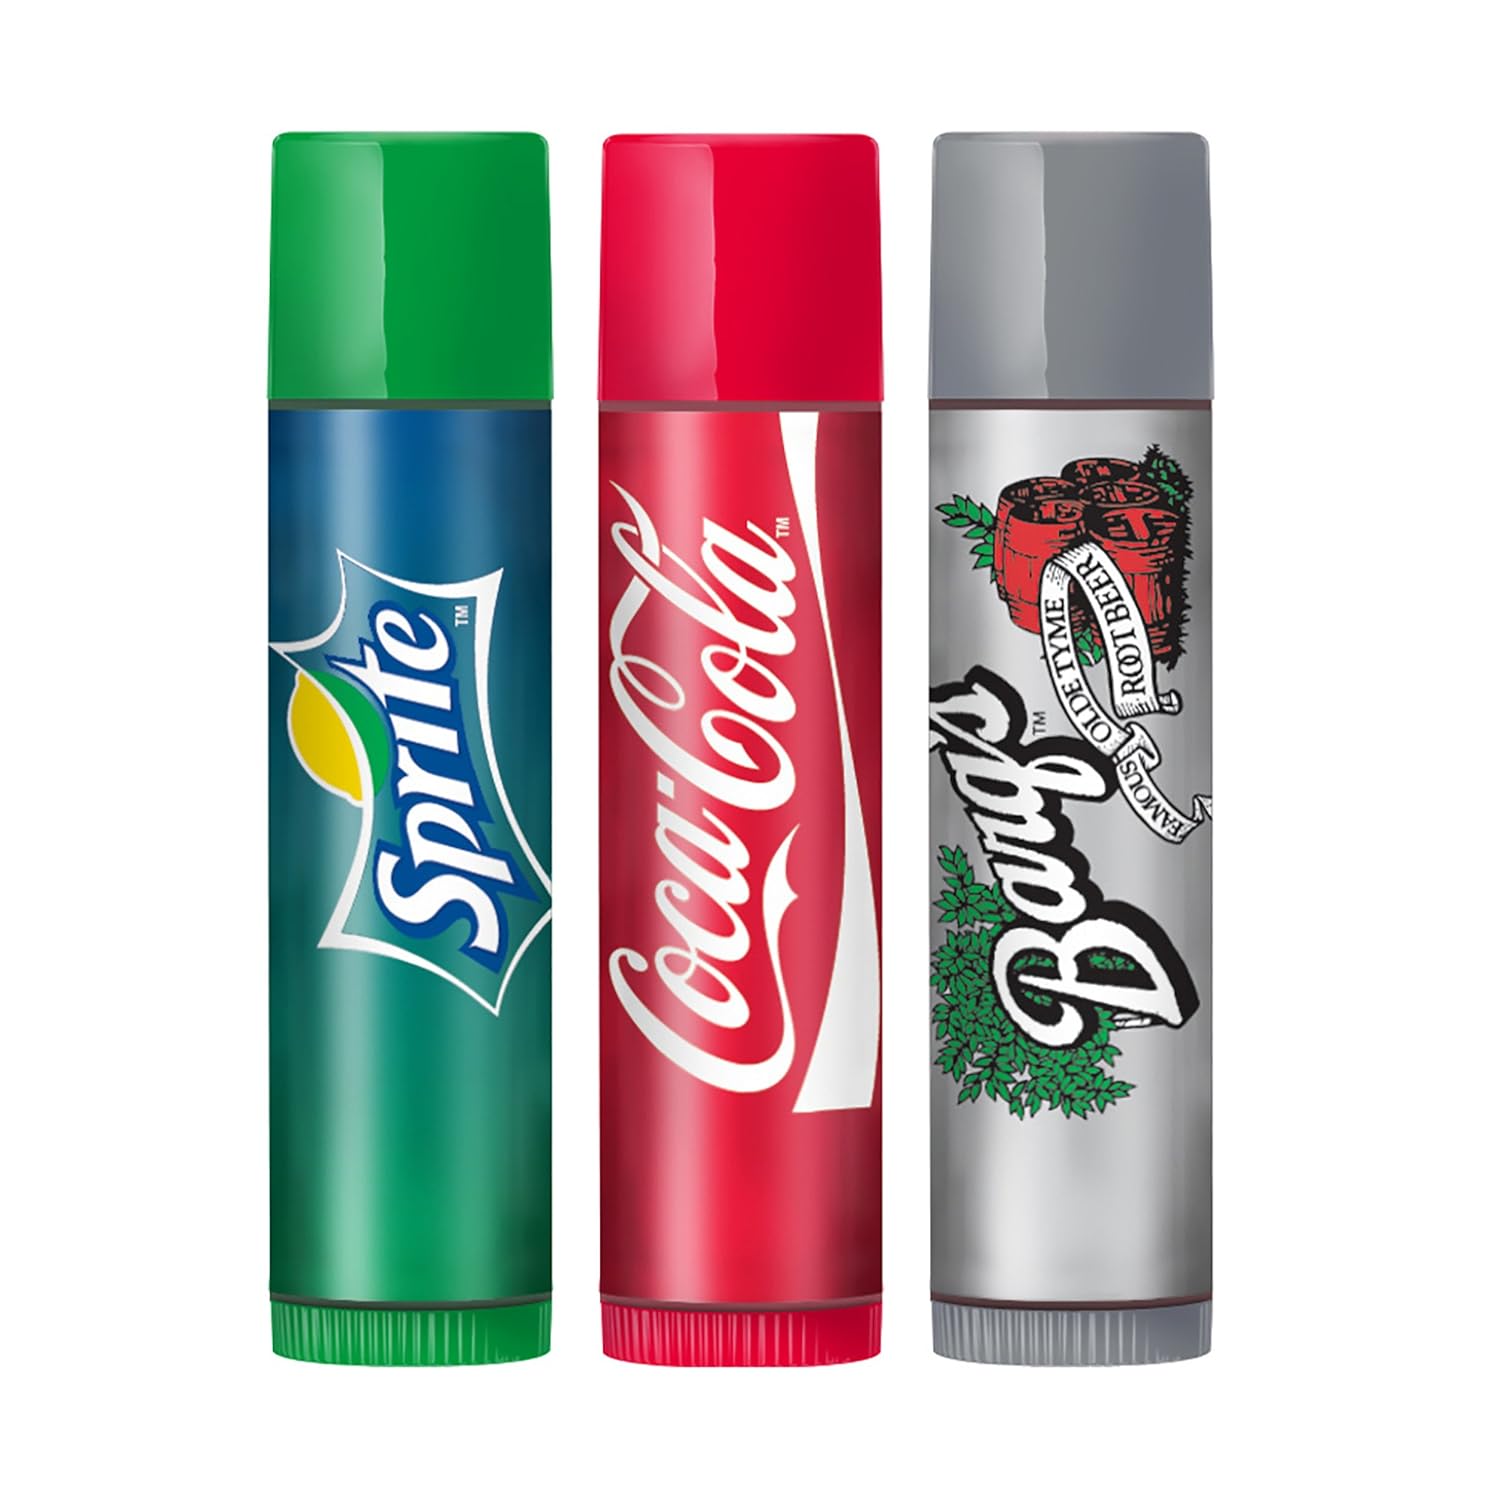 Lip Smacker Coca-Cola Flavored Lip Balm Set, Flavors, Sprite, Coke, Barq's Root Beer, For Kids, Men, Women, 3 Count (Pack of 1) : Beauty & Personal Care